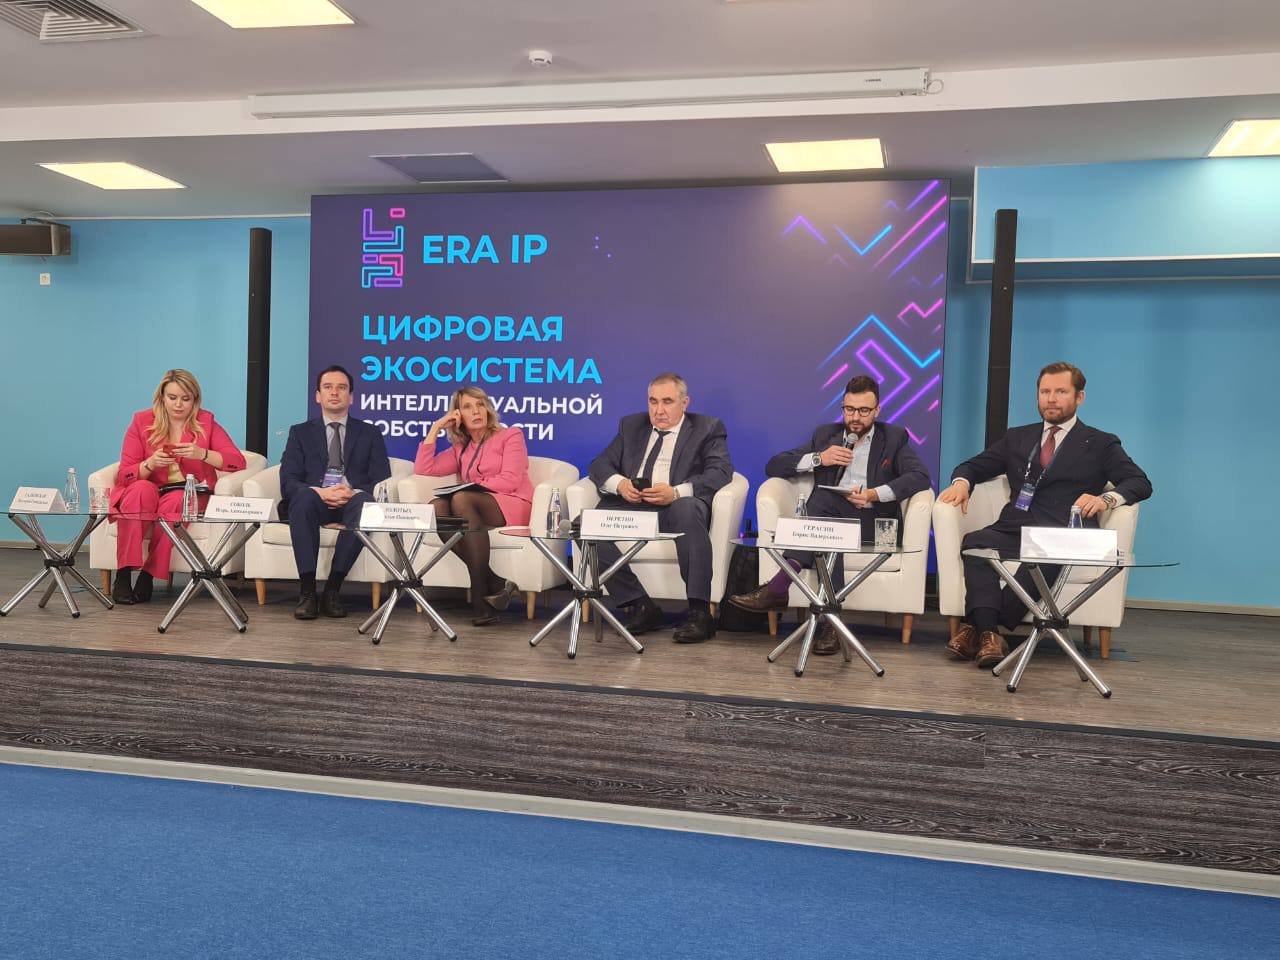 Dmitry Markanov spoke at the Digital Transformation Conference: "ERA IP: The Digital Ecosystem of Intellectual Property